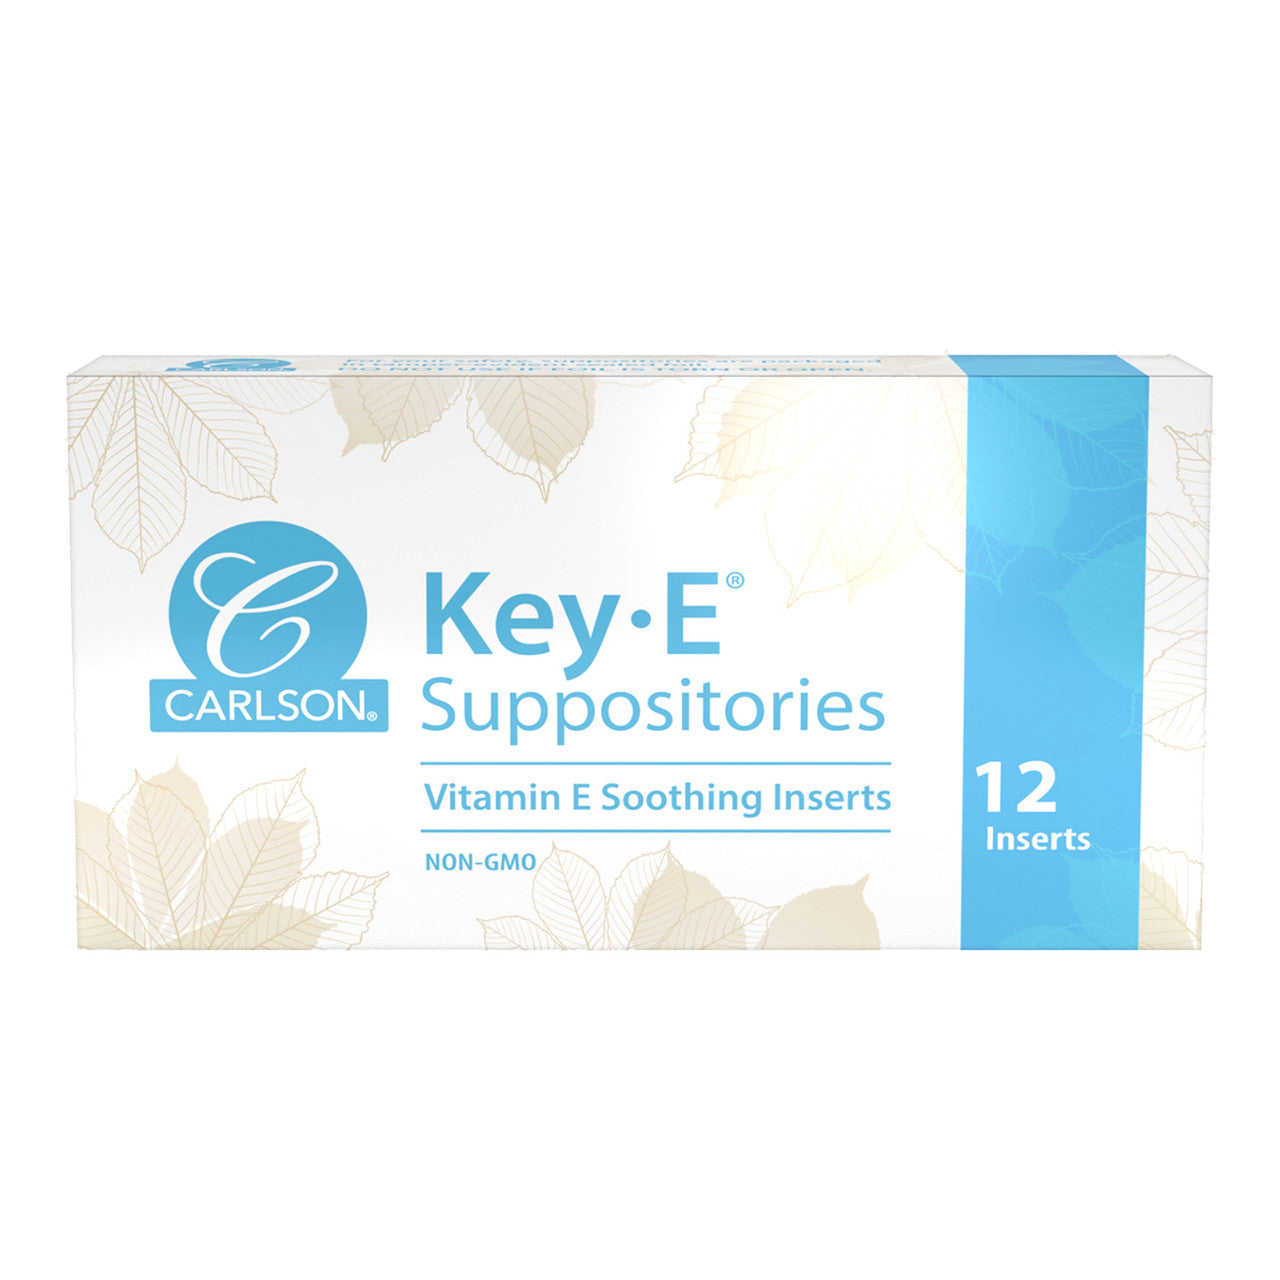 Key-E Suppositories